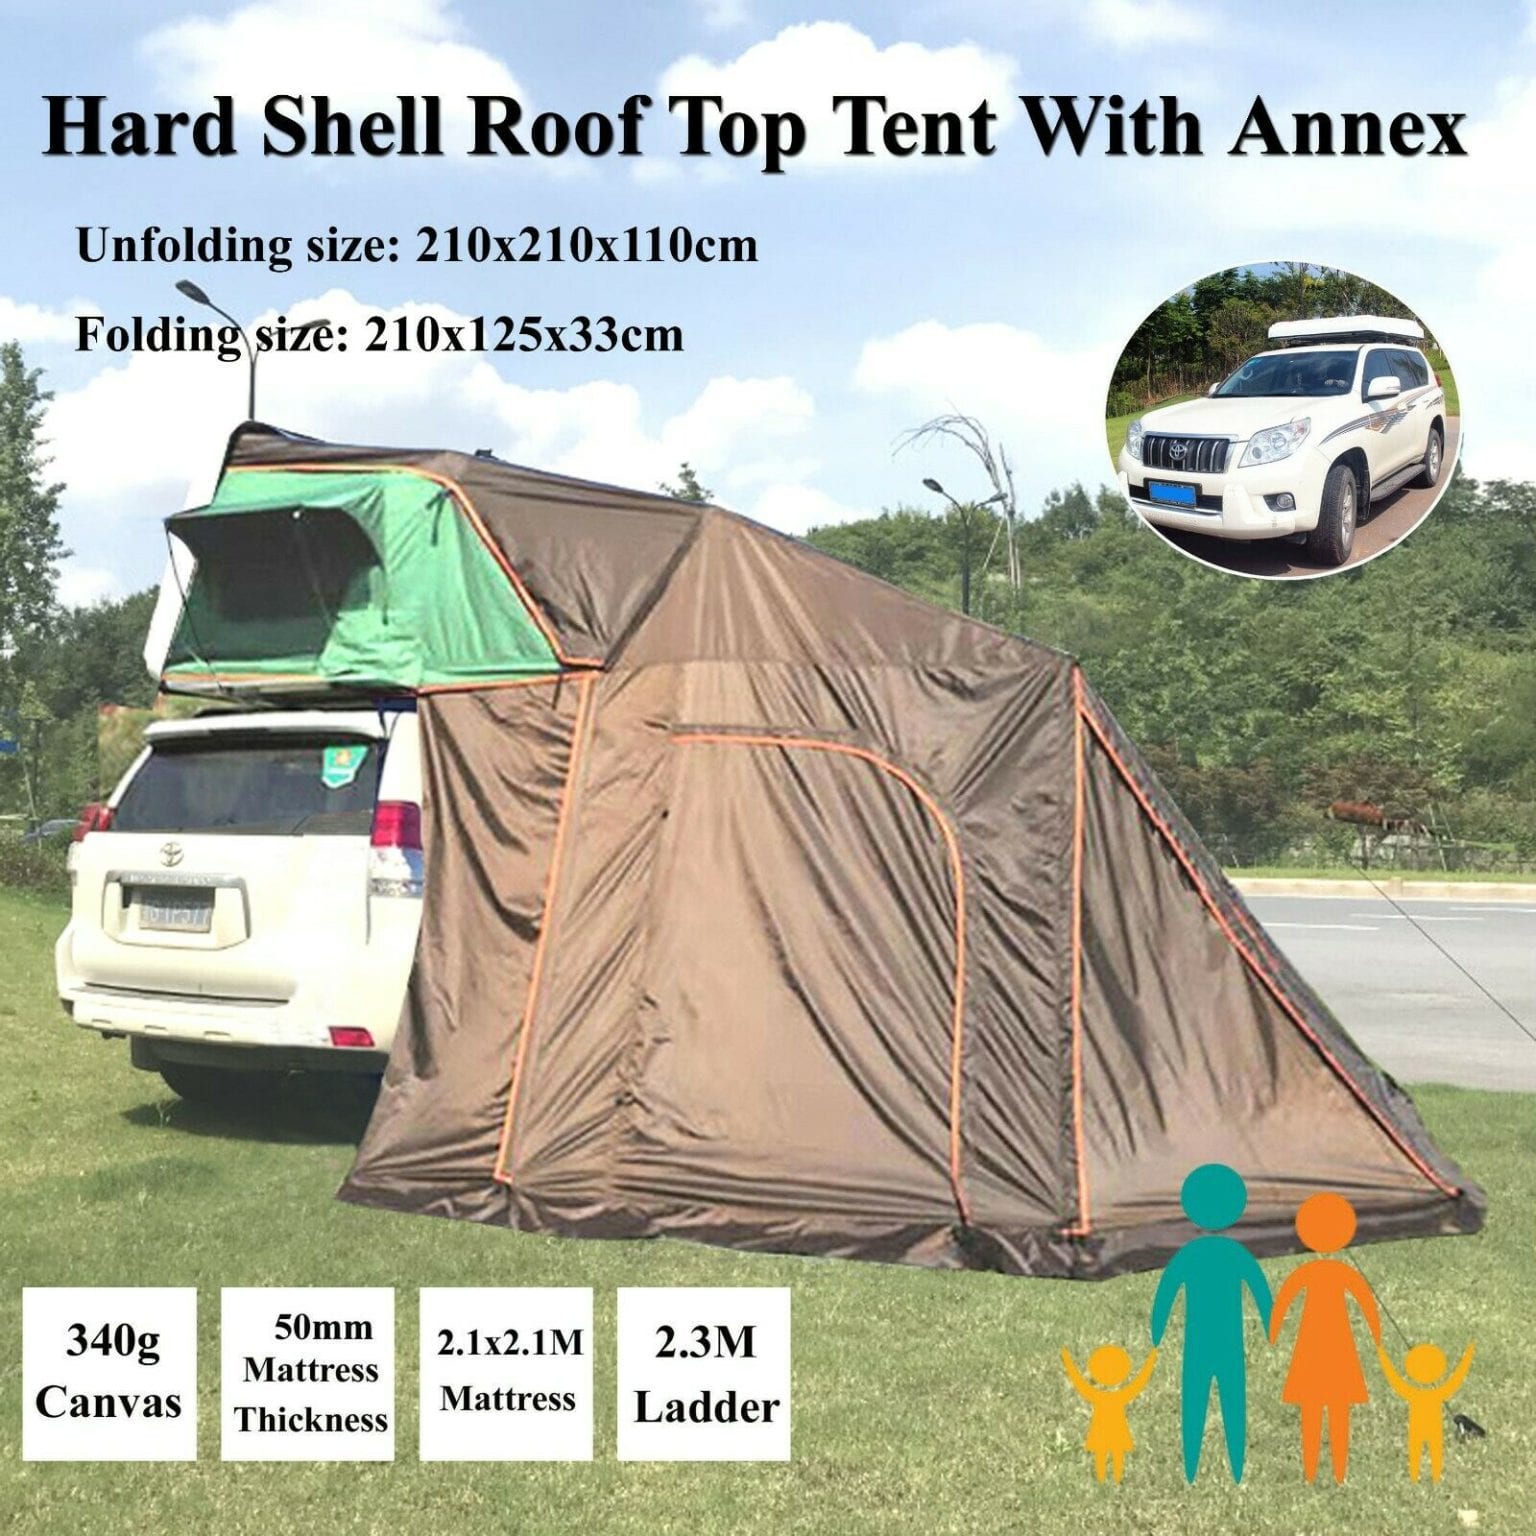 Hard Black Shell Aerodynamic Foldable Roof Top Tent Camping Rooftop 2 ...